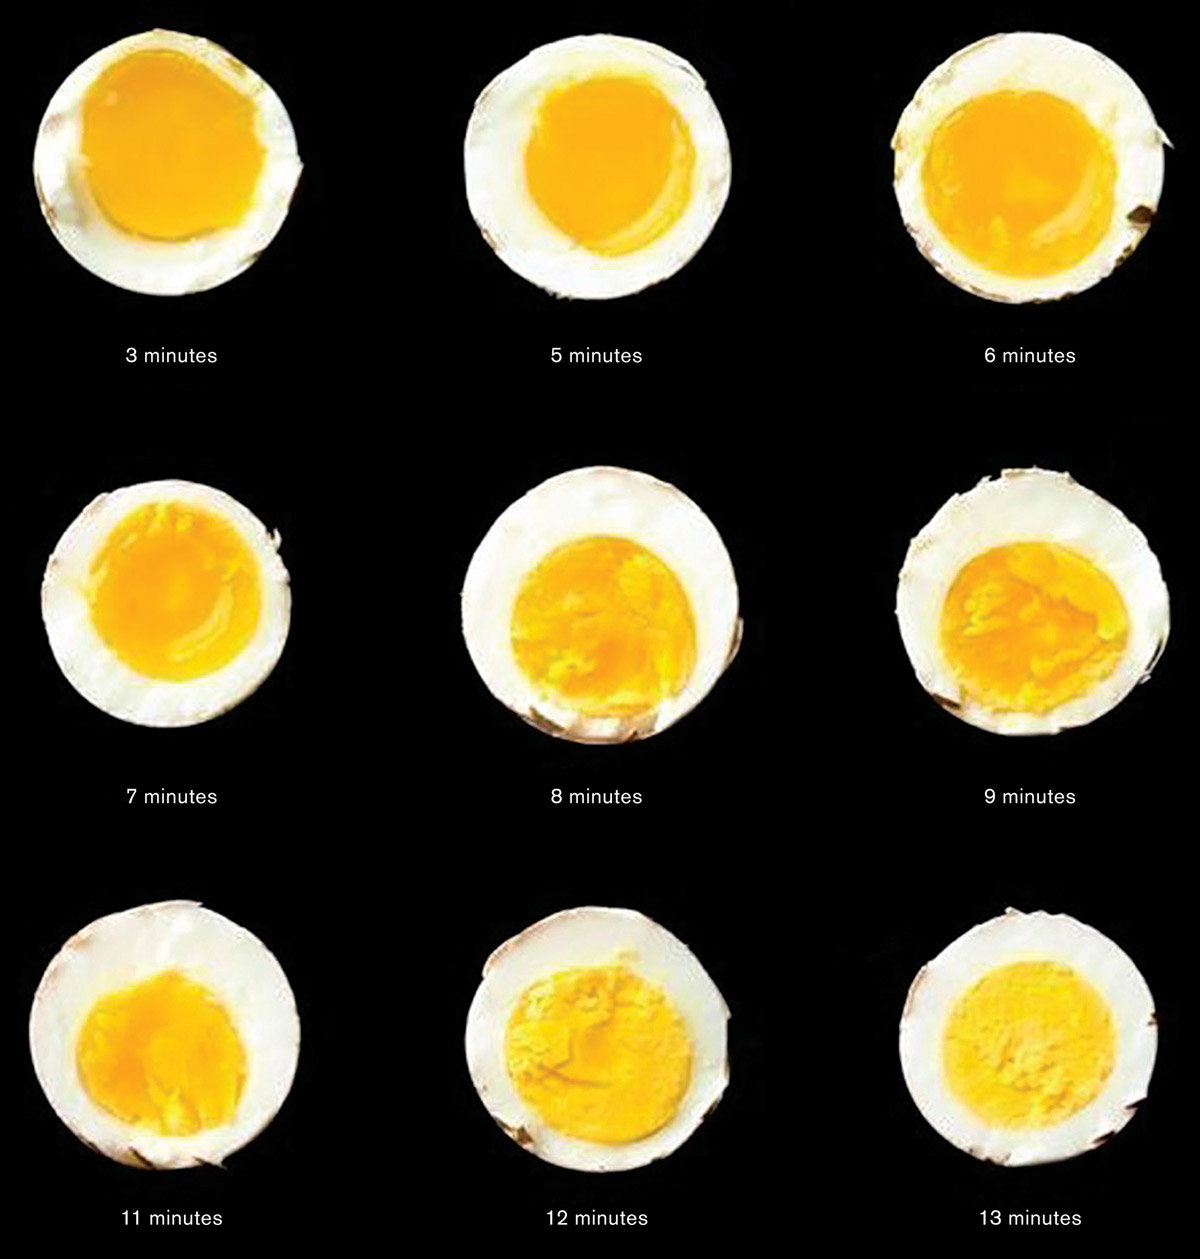 A photograph of nine cross sections of eggs boiled for progressively longer lengths of time. The yolks range from runny to well-done based on how many minutes they have been boiled.